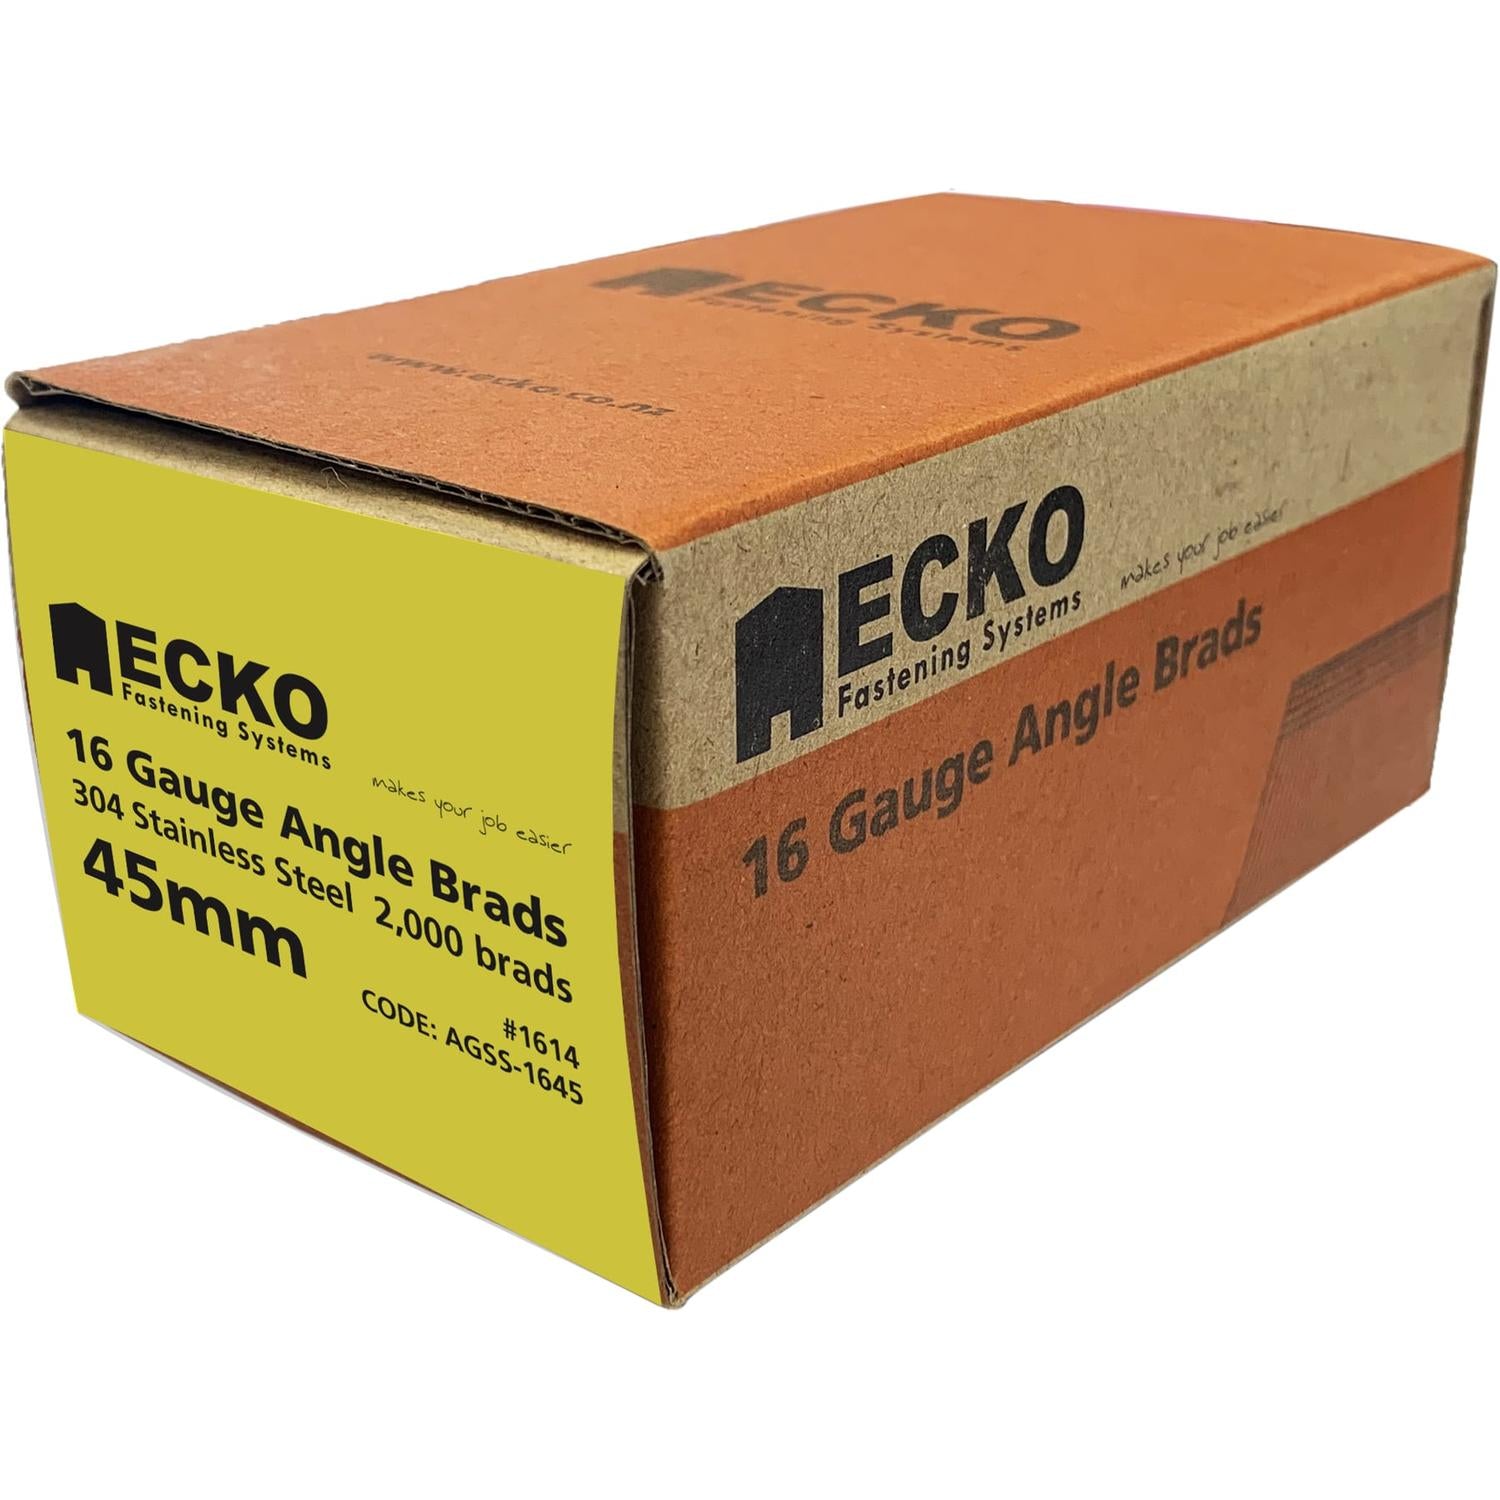 Ecko 16 Gauge Angle Brads Gasless Pack 45 X 1.6Mm 304 Stainless Steel (2000)